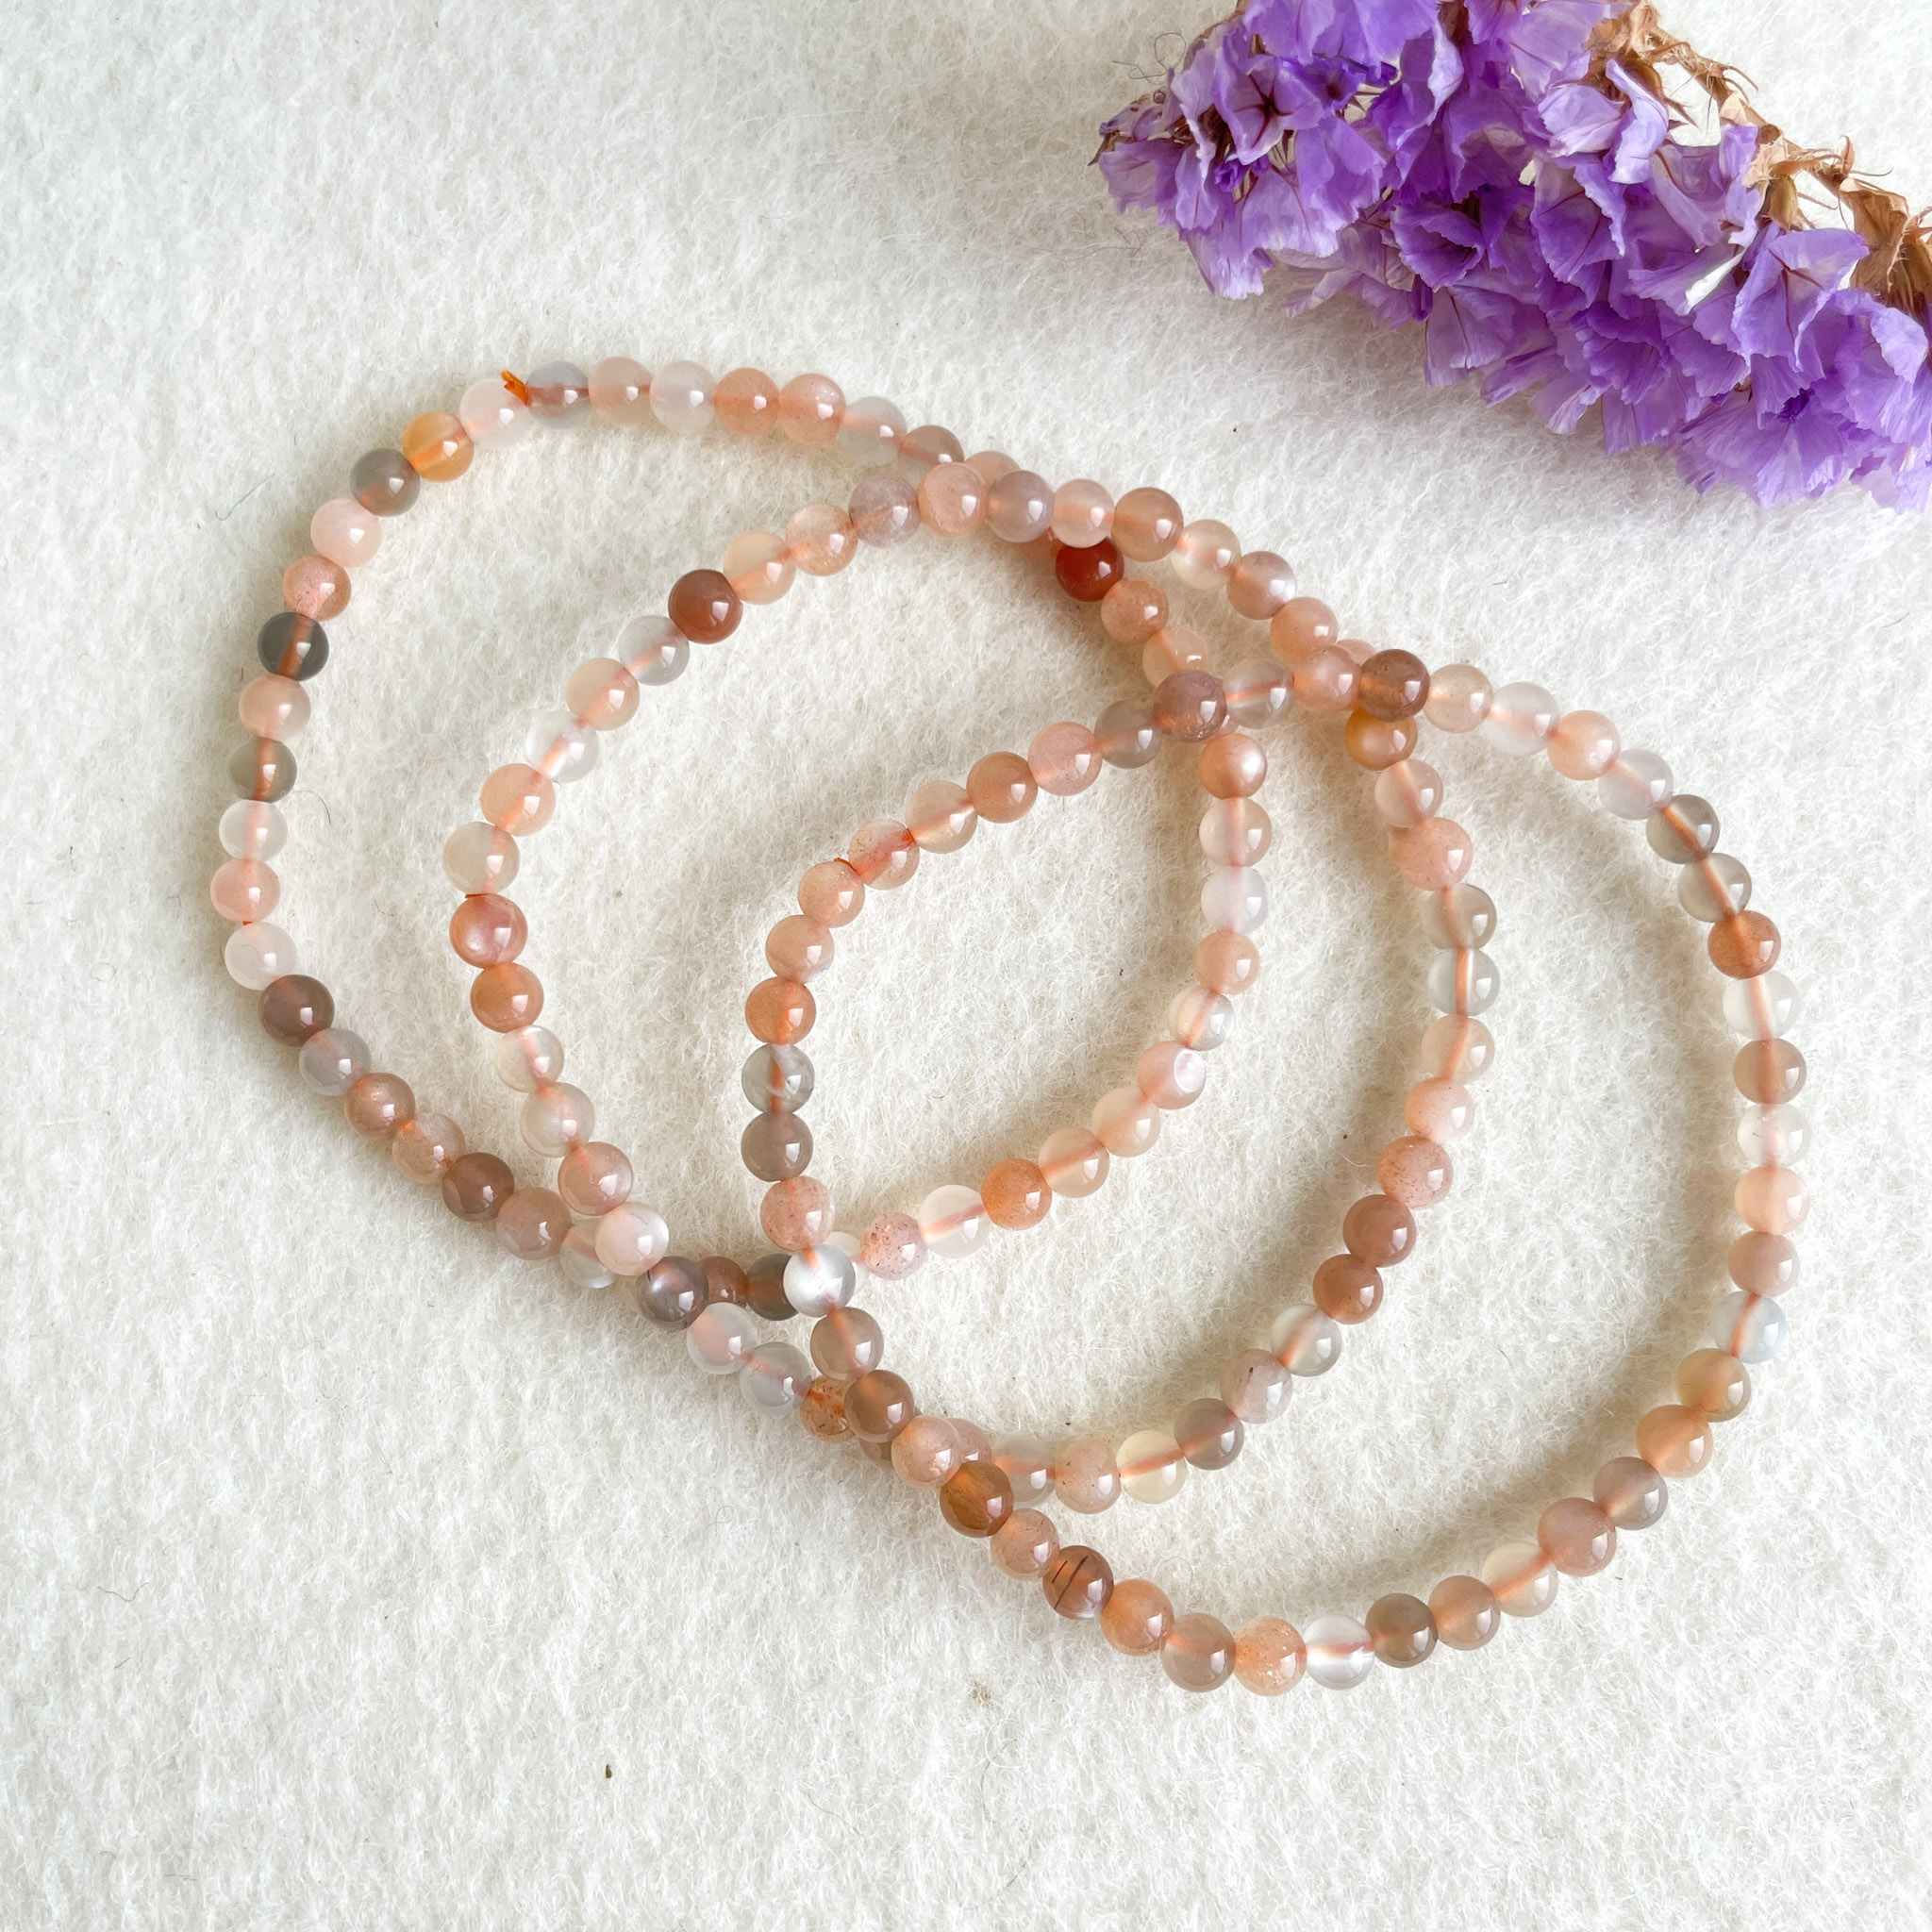 Three strands of multicolored bead bracelets on a white textured background with a cluster of purple flowers partially visible in the corner.